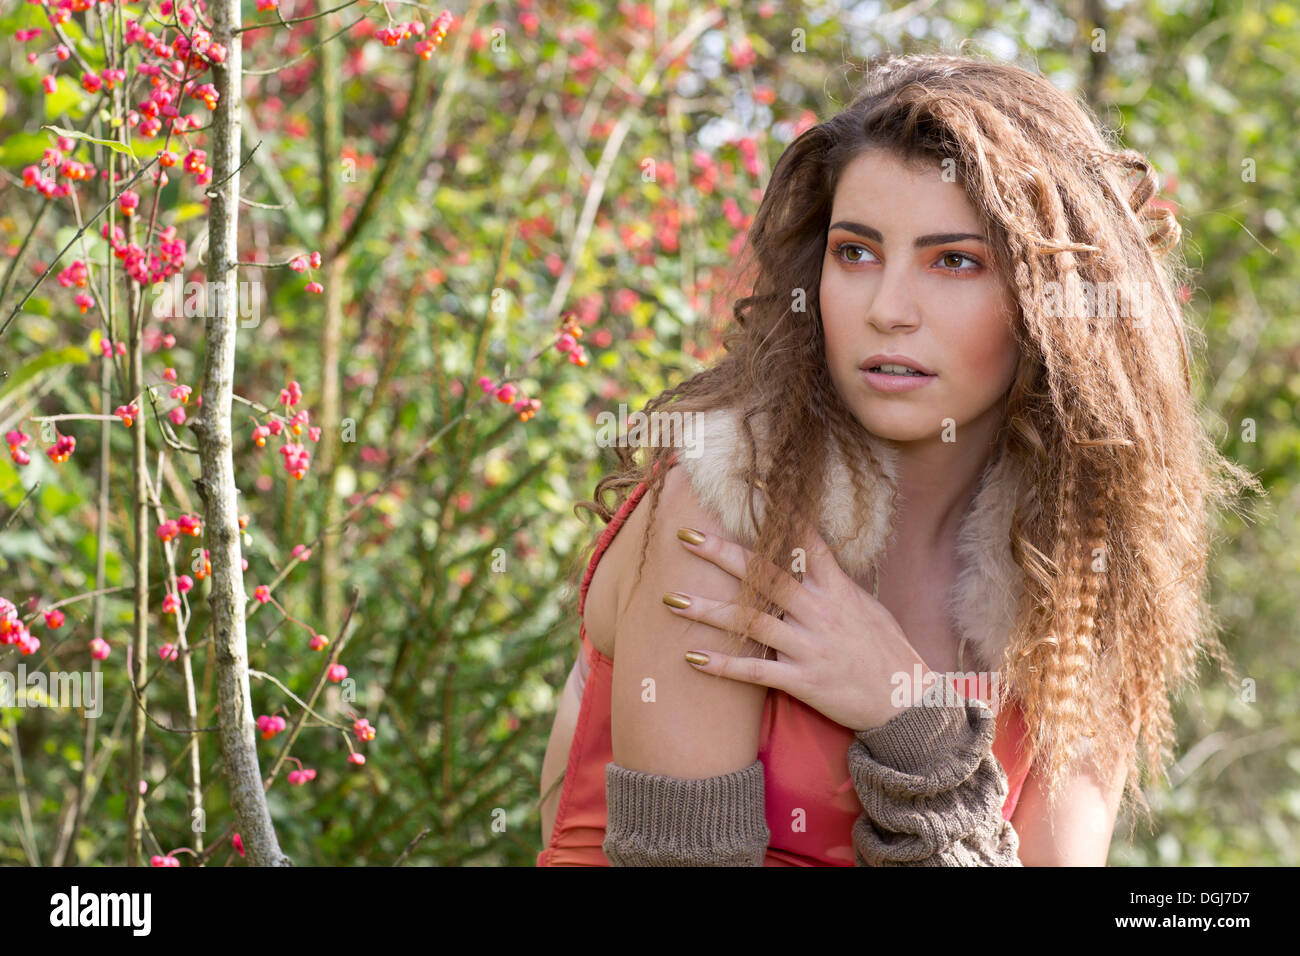 Portrait of a young woman outdoors in autumn Stock Photo